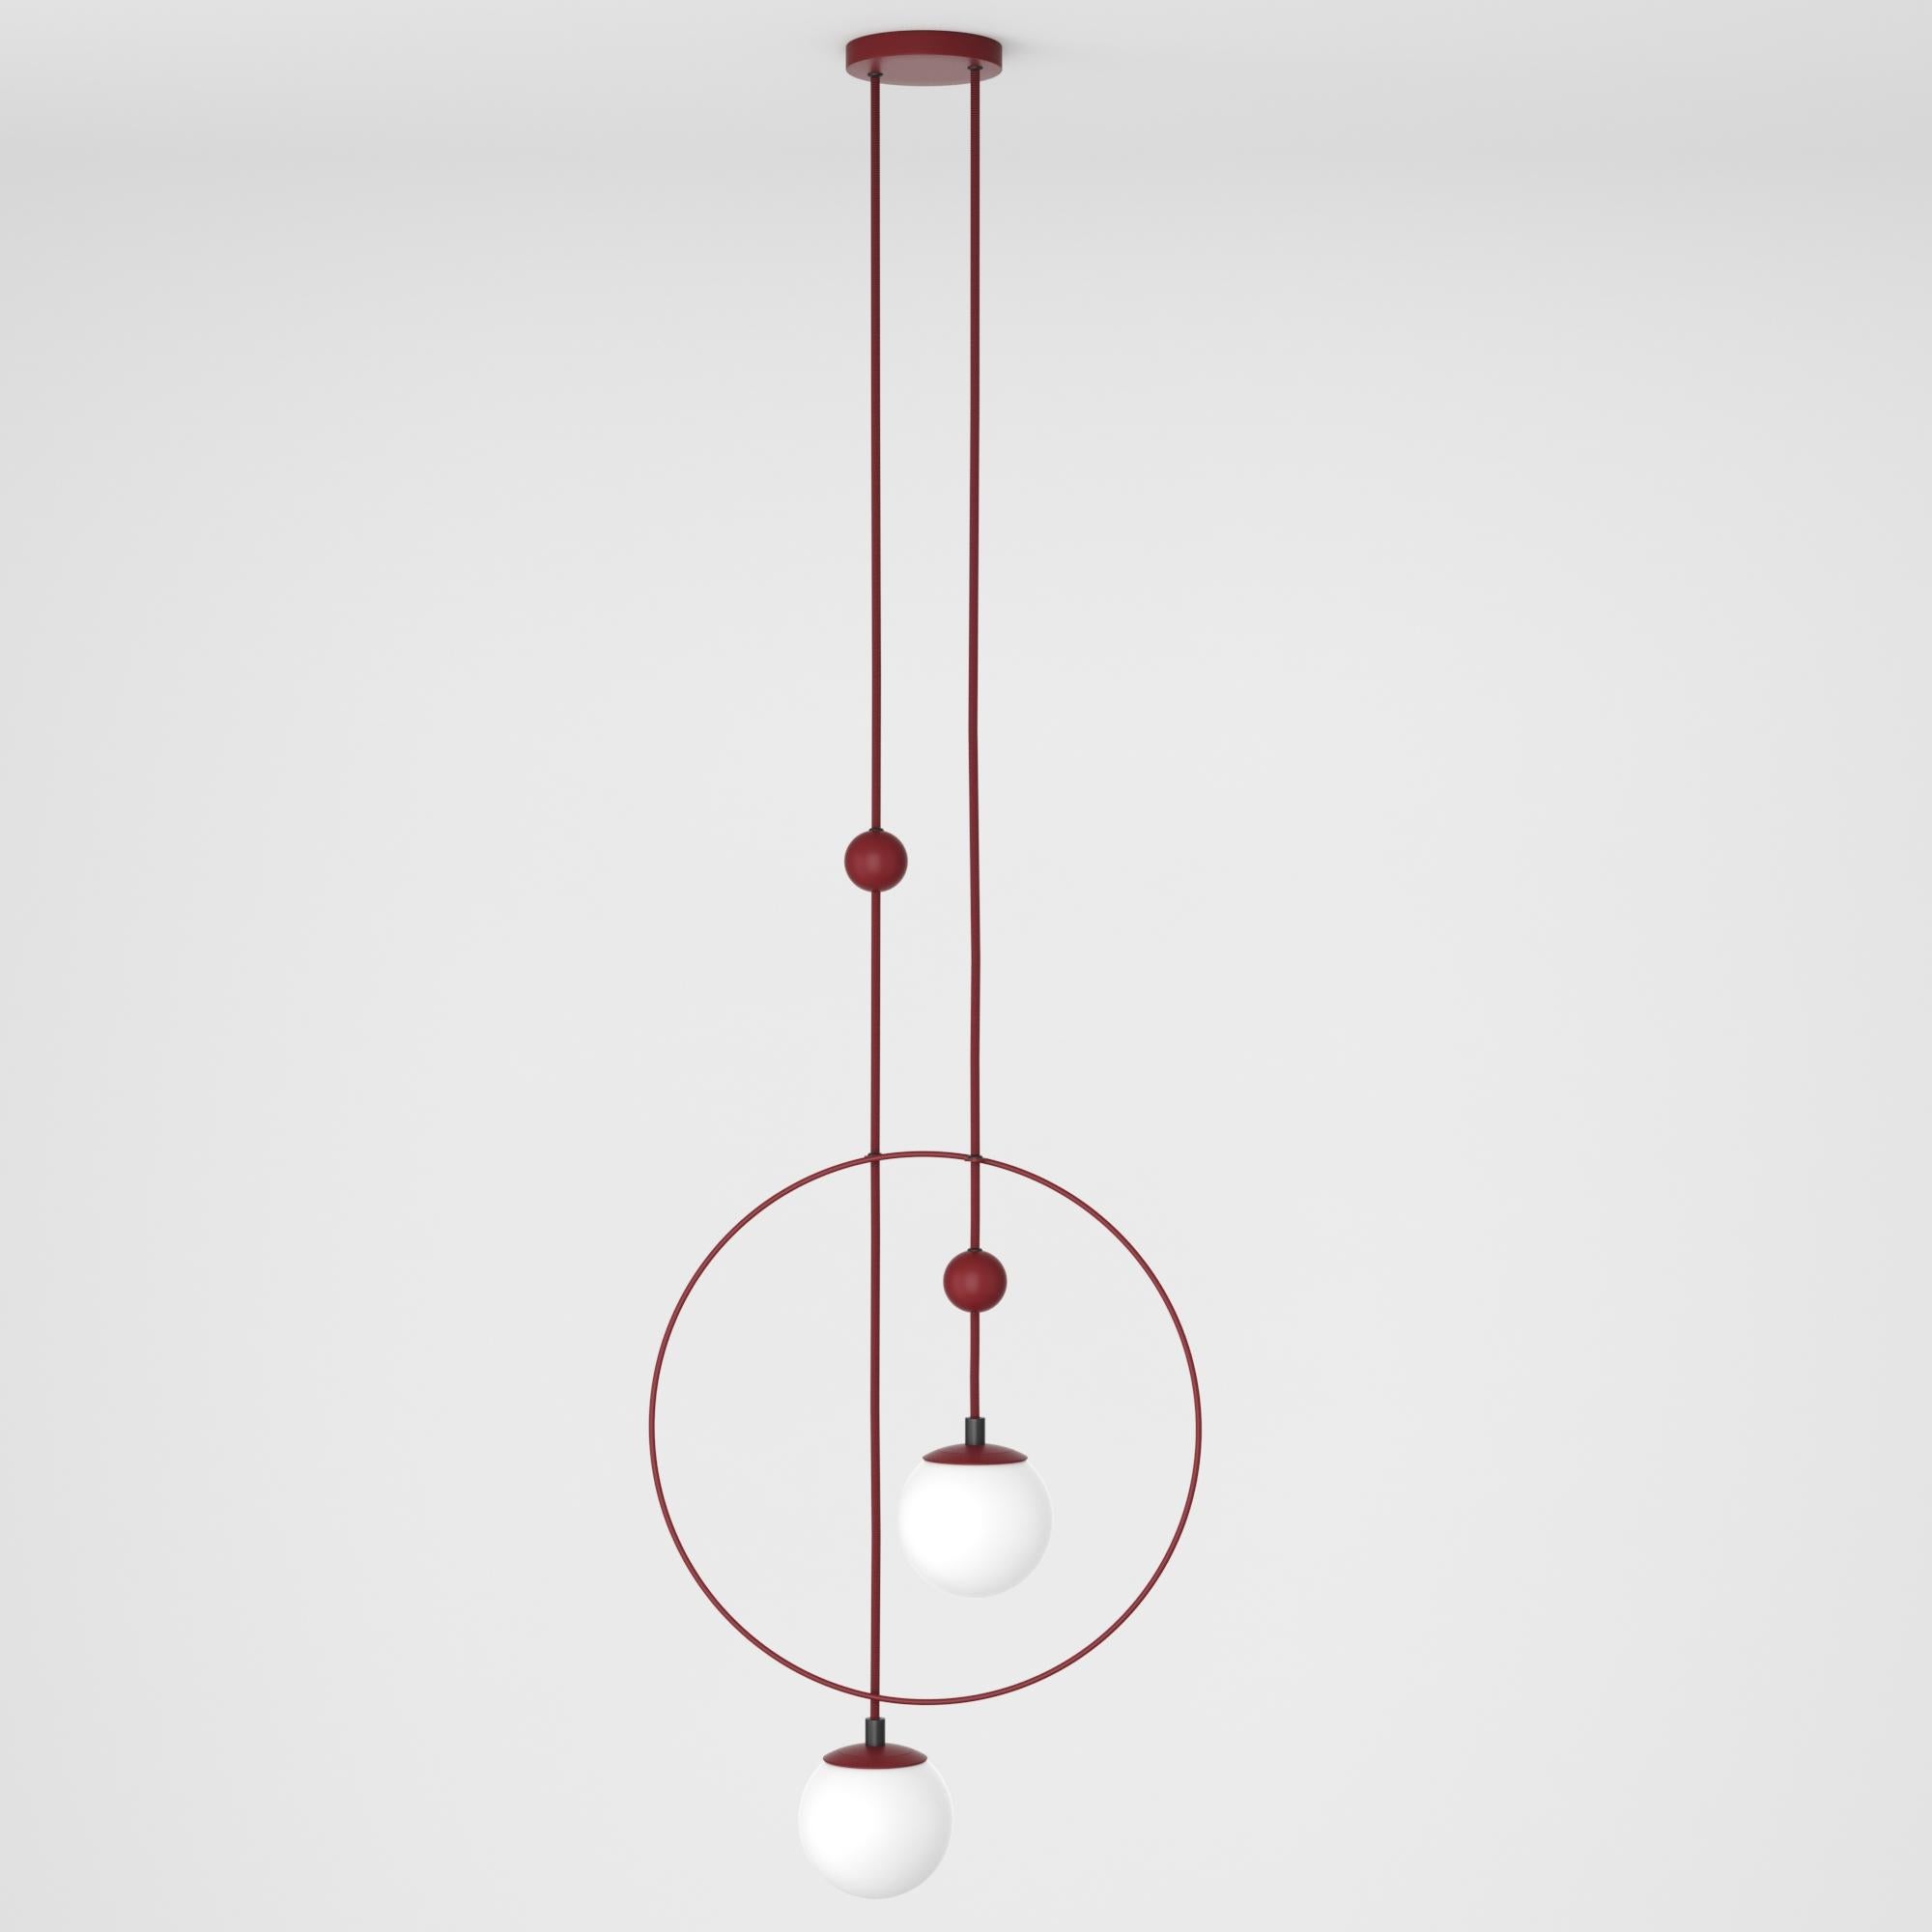 Hand-Crafted Danish Pendant Lamp, Modern Steel Lighting, Glass Sphere Edition For Sale